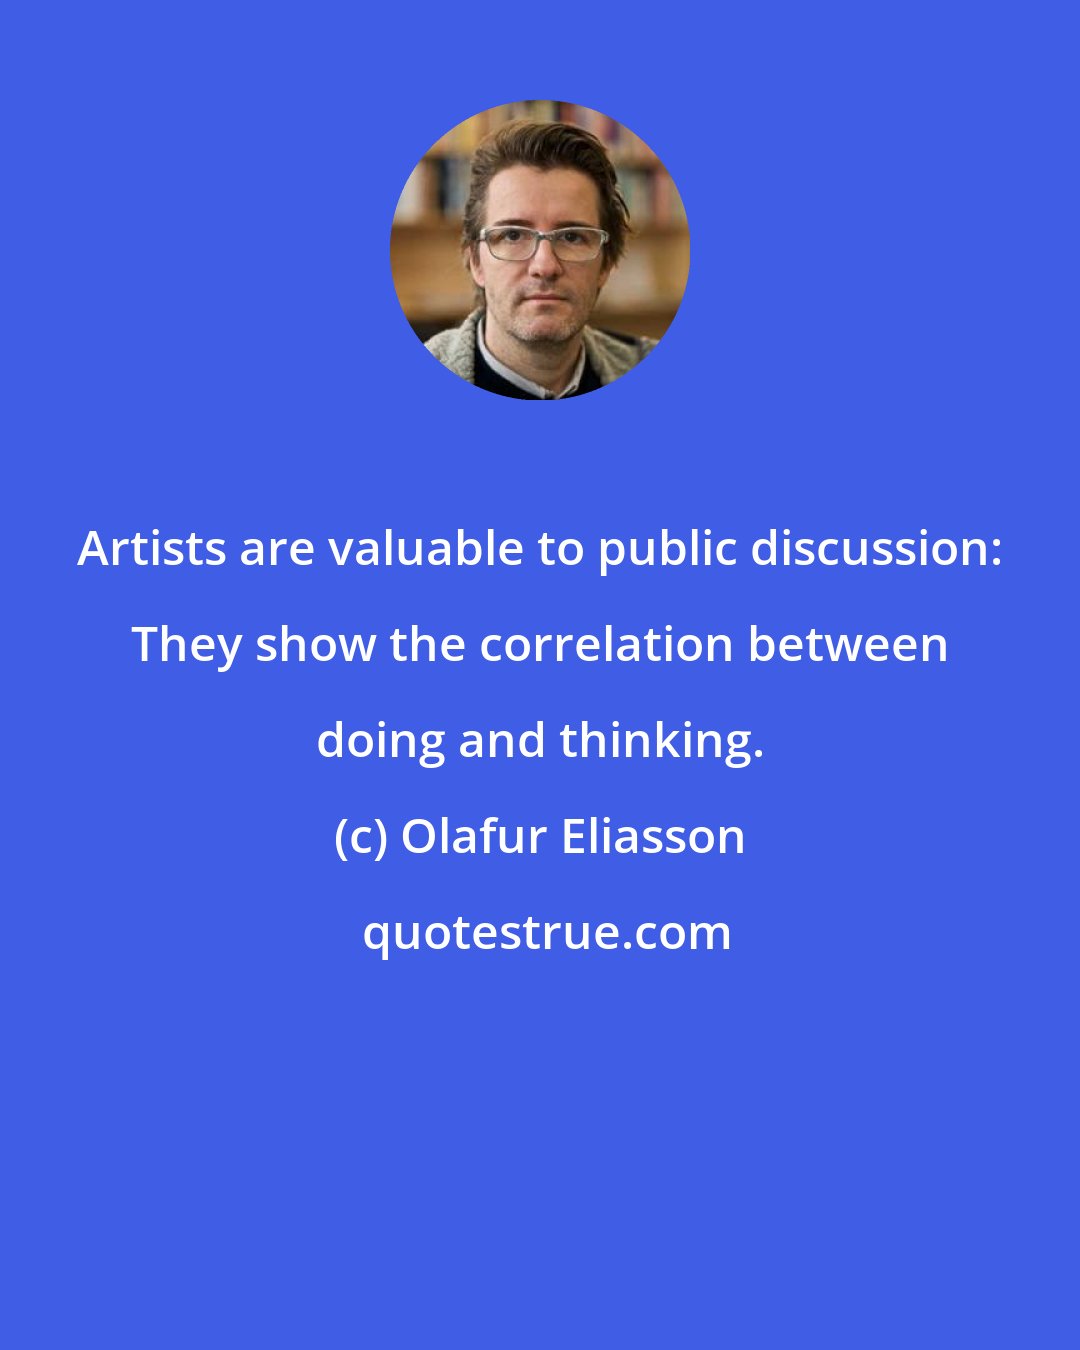 Olafur Eliasson: Artists are valuable to public discussion: They show the correlation between doing and thinking.